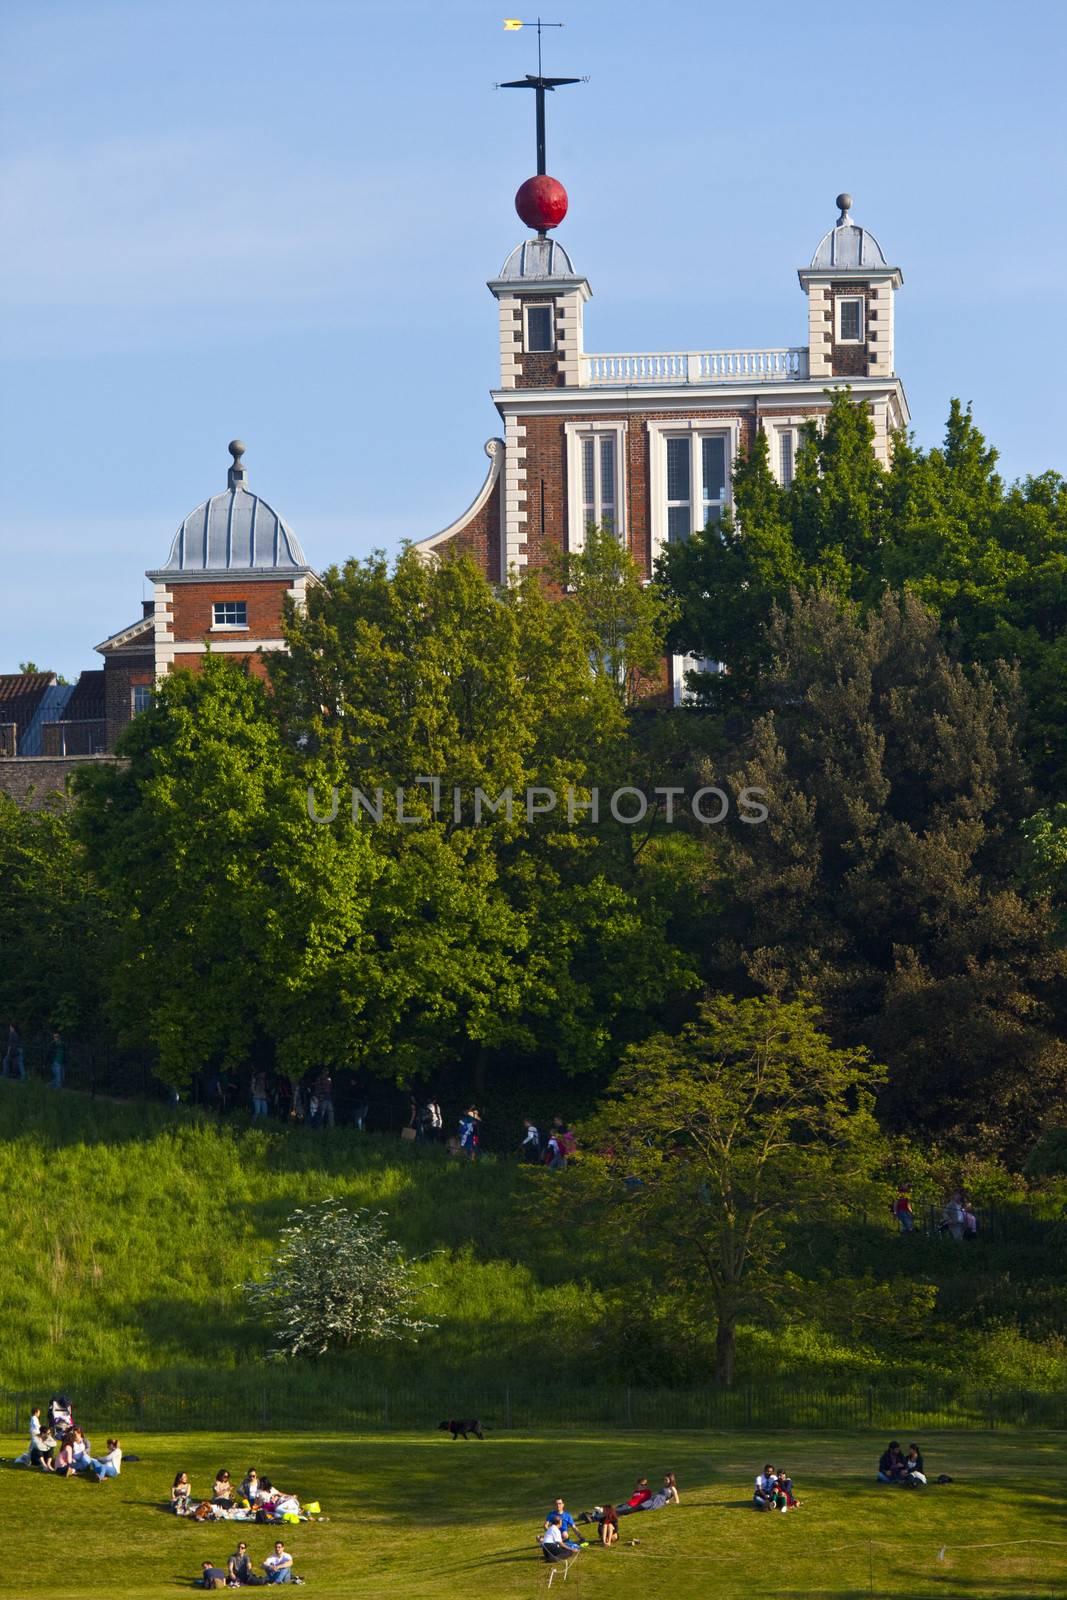 The Royal Observatory in Greenwich, London by chrisdorney